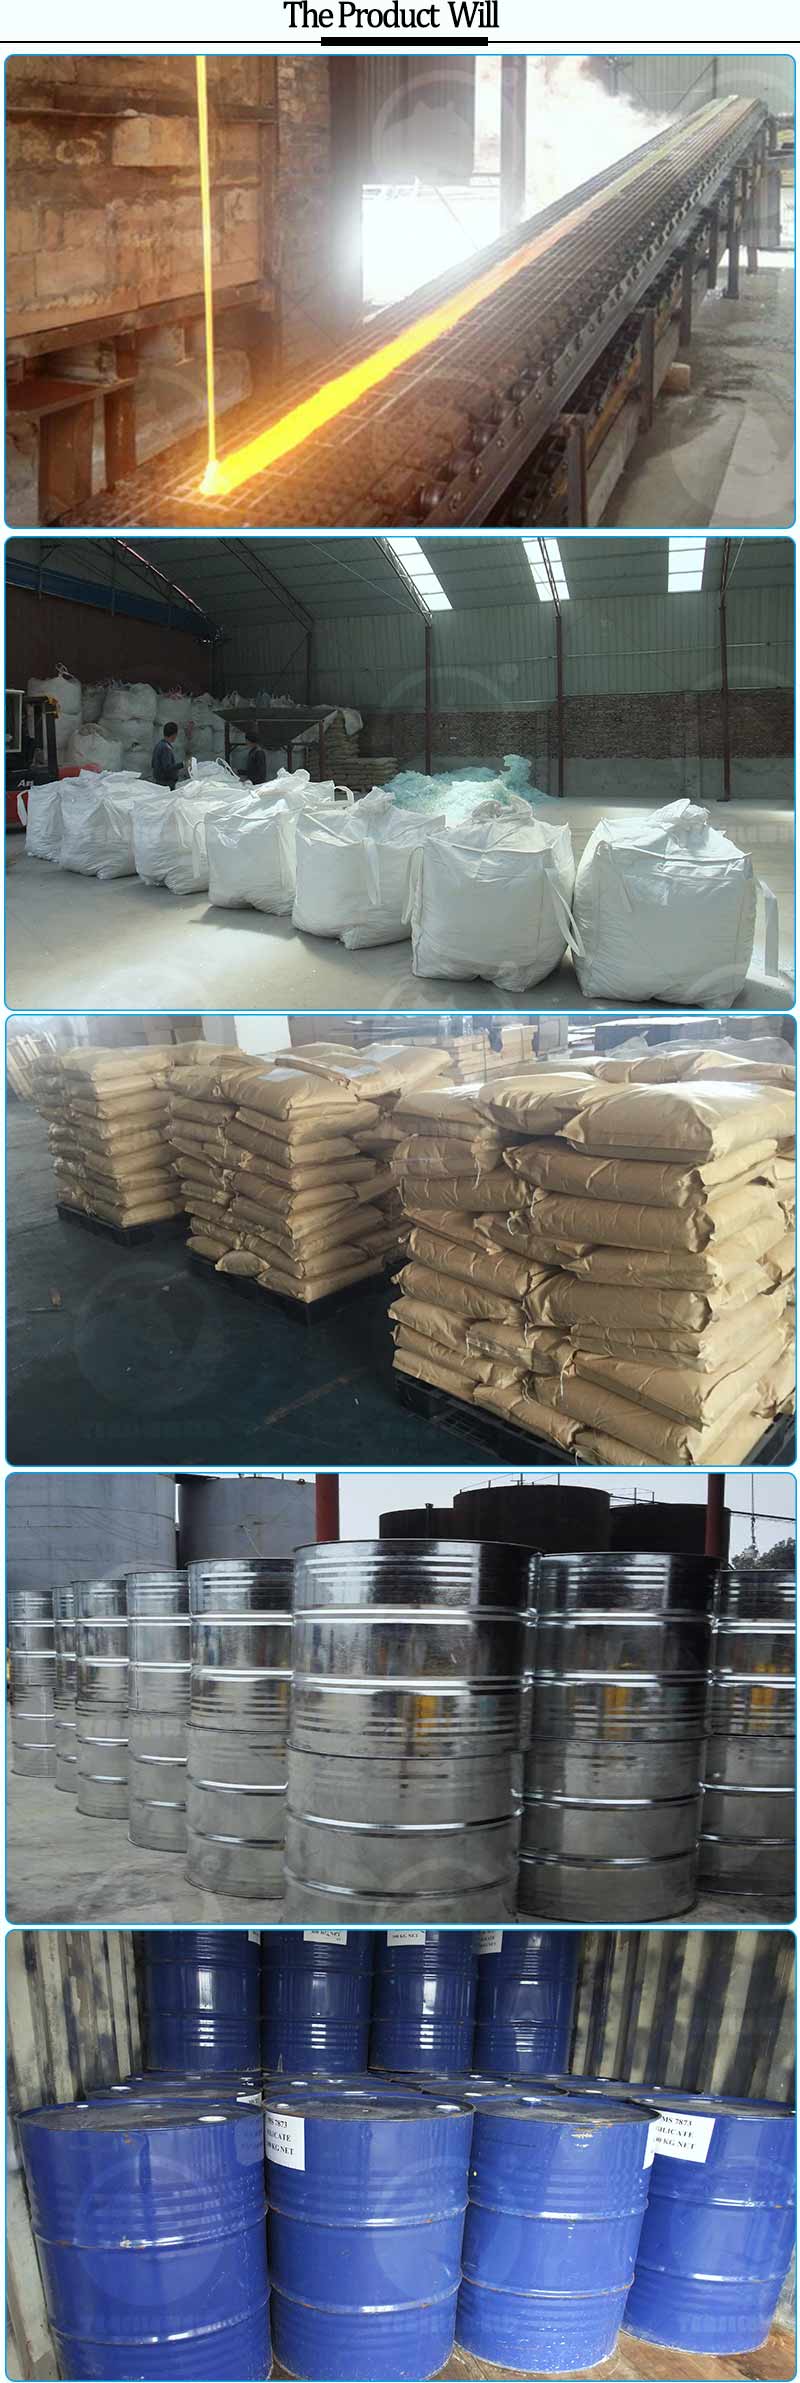 China Qingdao supplier lowest price Sodium Silicate